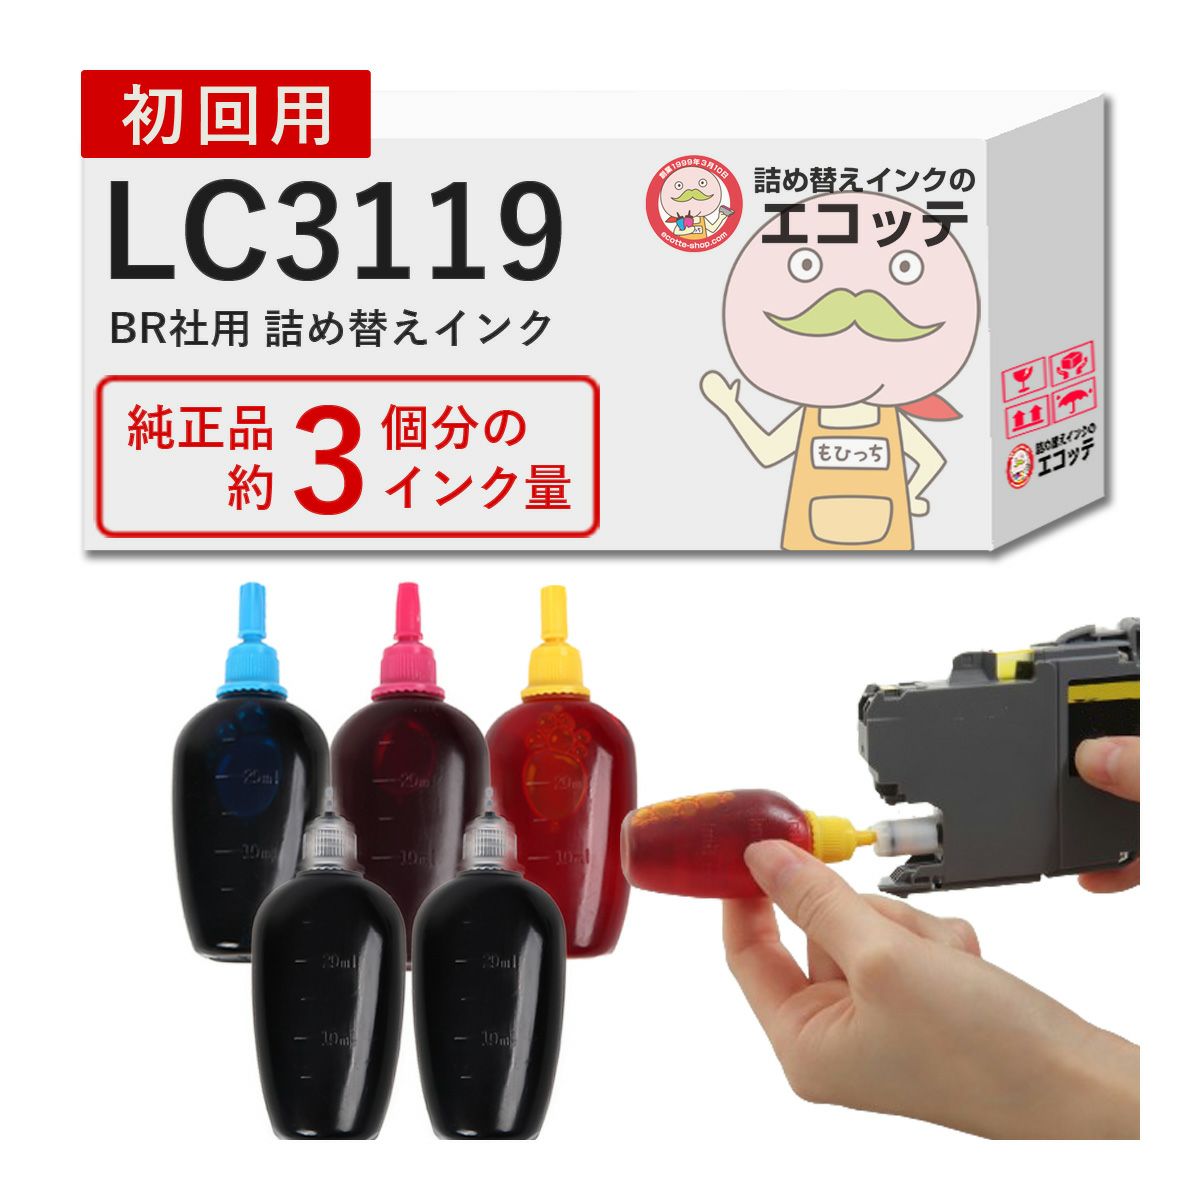 【LC3119-4PK(LC3117-4PK)】brother(ブラザー) 詰め替えインク 初回購入用ビギナーセット 30ml×5  MFC-J6983CDW MFC-J6583CDW MFC-J6580CDW 対応 | 詰め替えインクのエコッテ